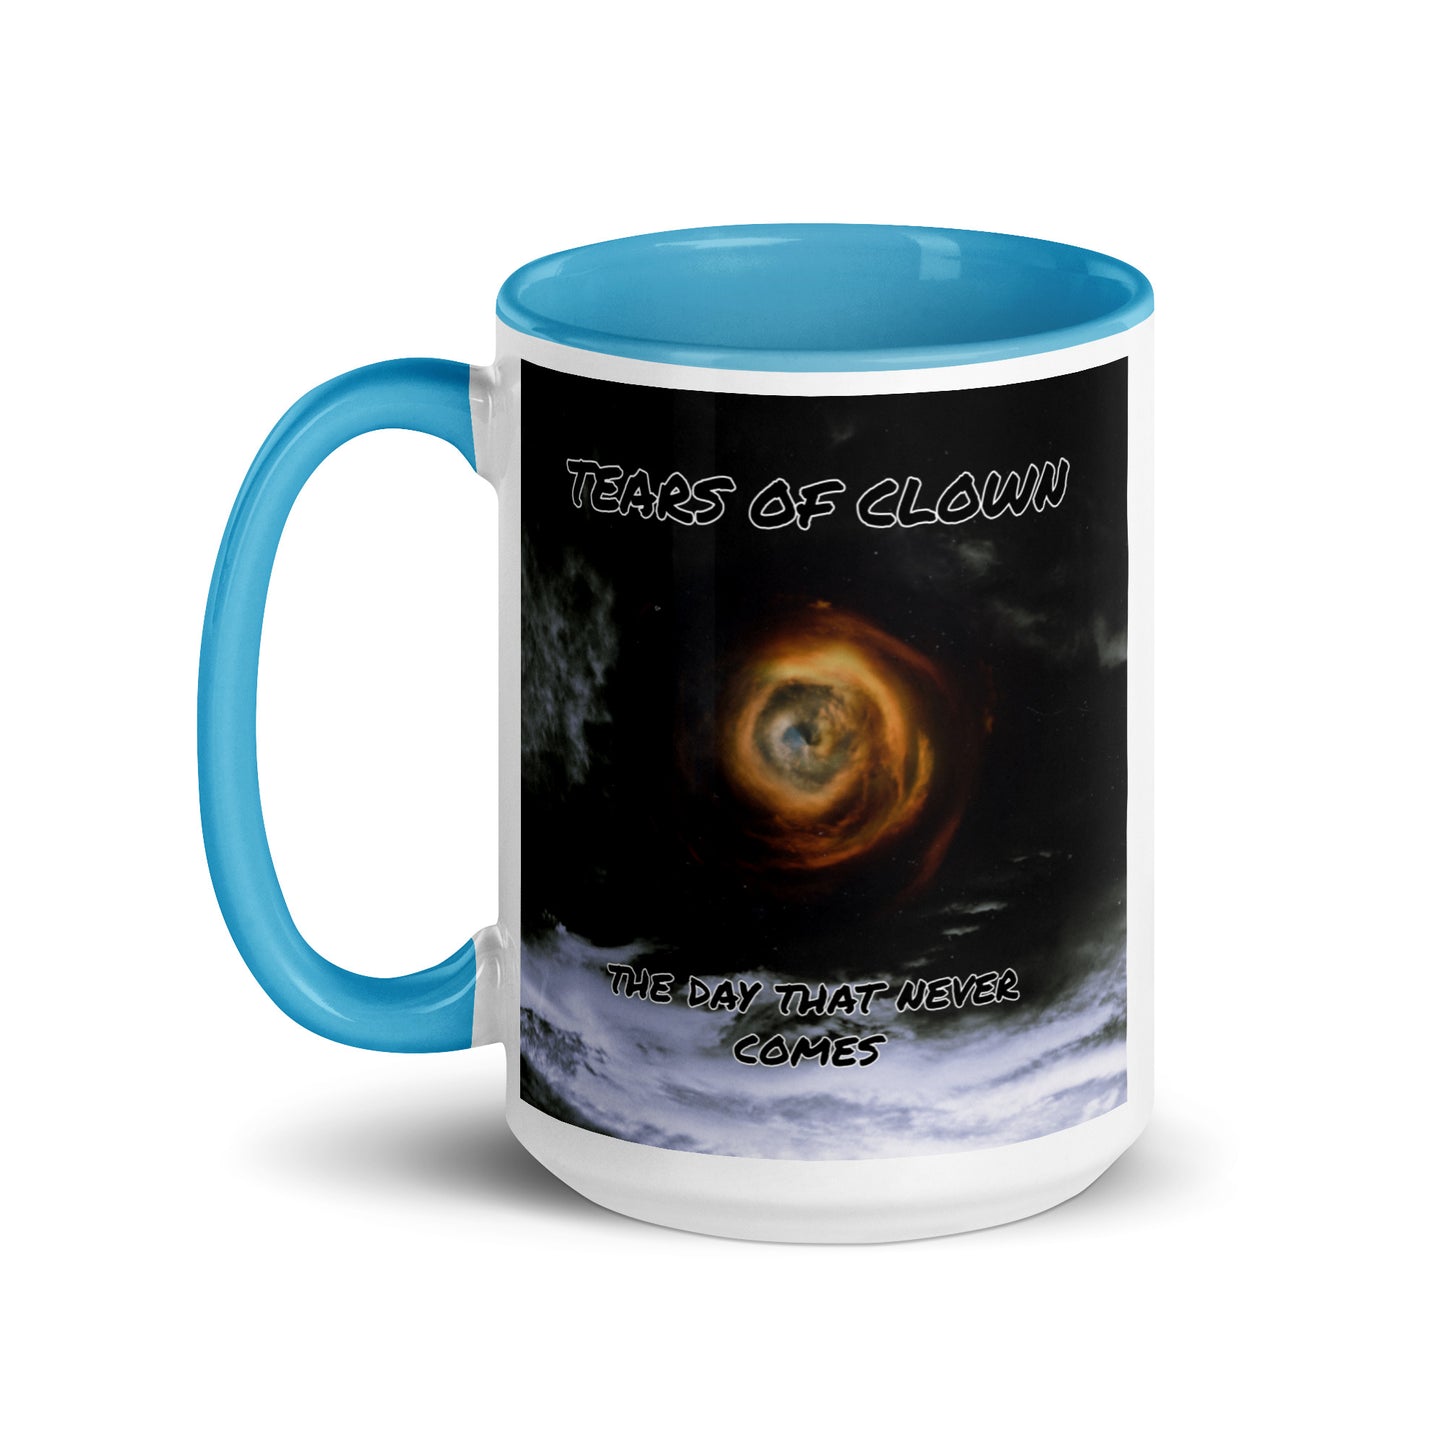 Tears Of Clown - The Day That Never Comes Mug With Color Inside